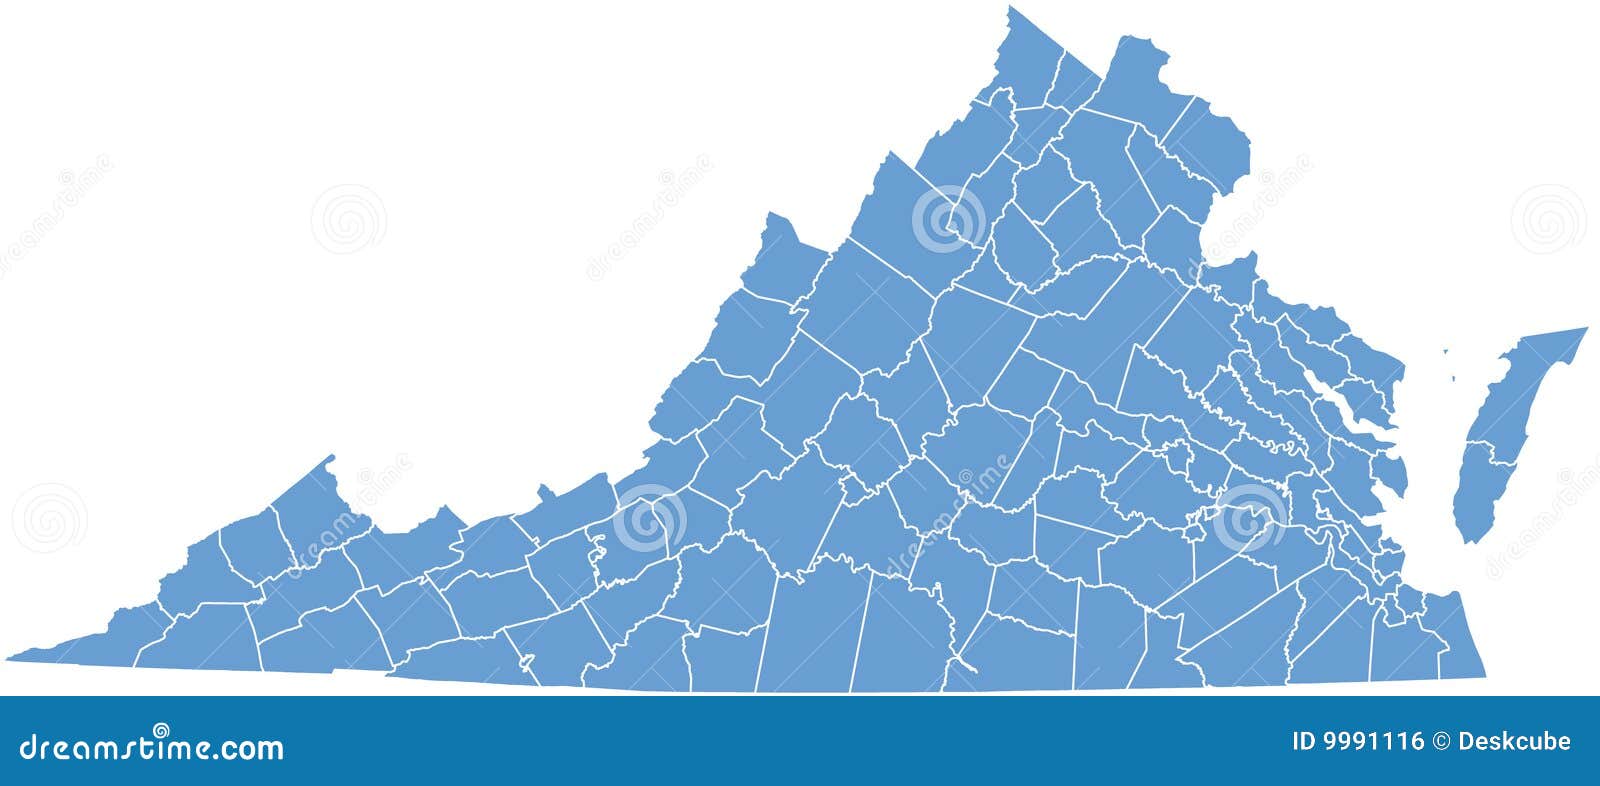 virginia state by counties